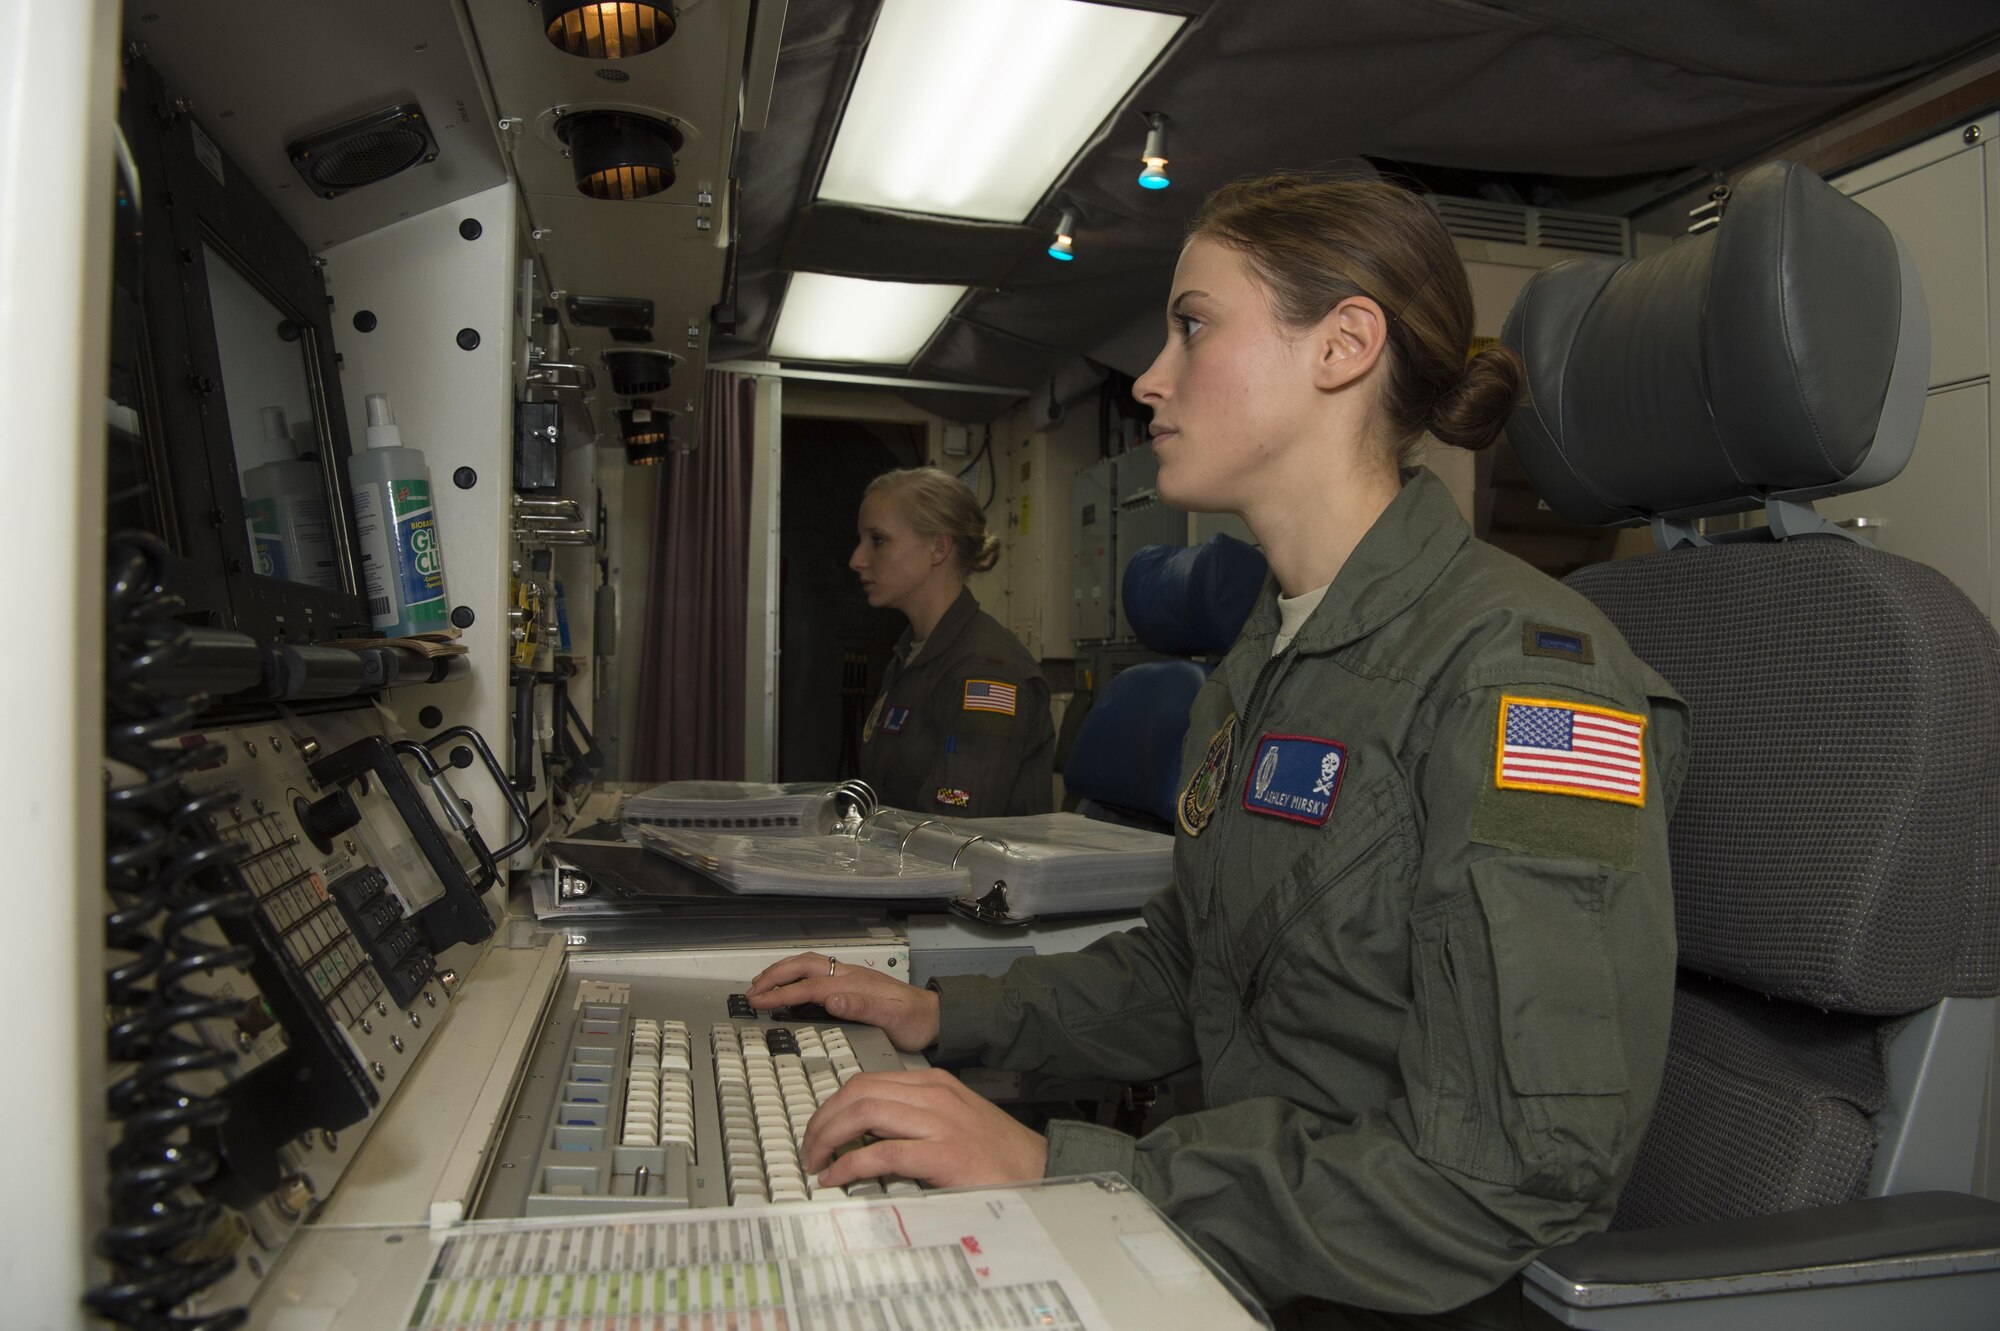 First Lt. Ashley Mirsky, 319th Missile Squadron missile combat crew commander, and 2nd Lt. Marie Blair, 319th MS deputy missile combat crew commander, check their monitors in a launch control center in the 90th Missile Wing missile complex, Dec. 19, 2016. The crew ensures they execute the mission safely, securely and effectively by holding each other accountable on job knowledge and striving to always improve. (U.S. Air Force photo by 1st Lt. Veronica Perez)